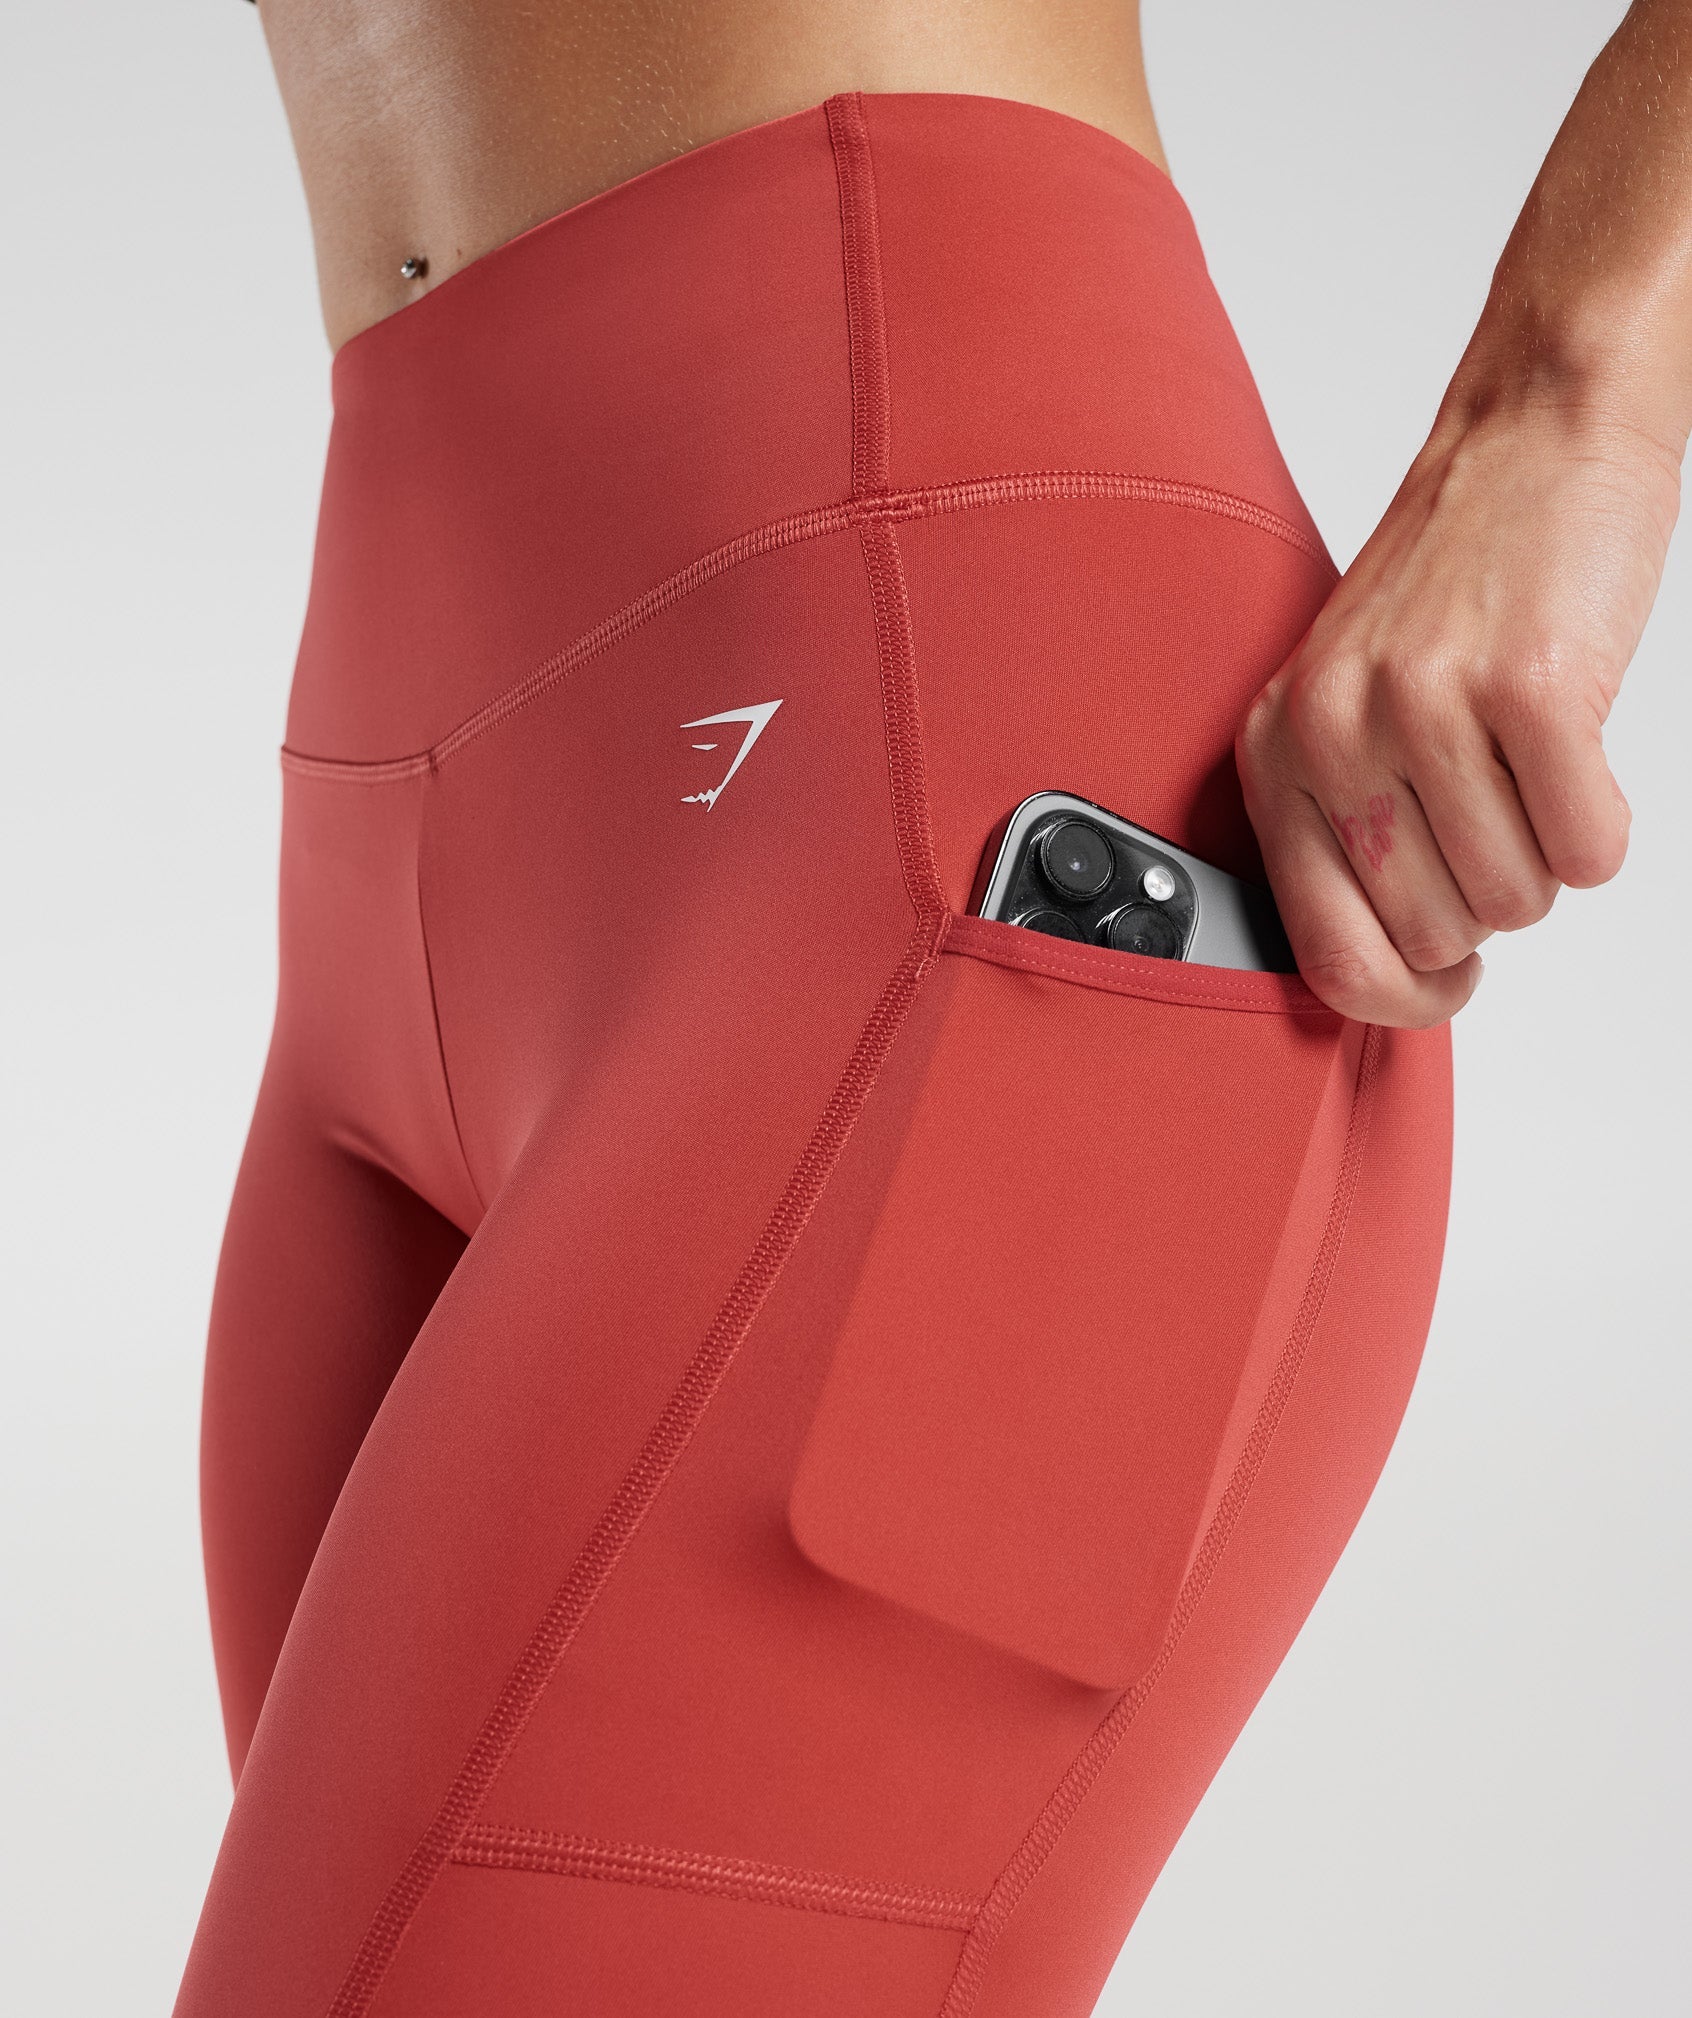 Pocket Leggings in Sundried Red - view 5